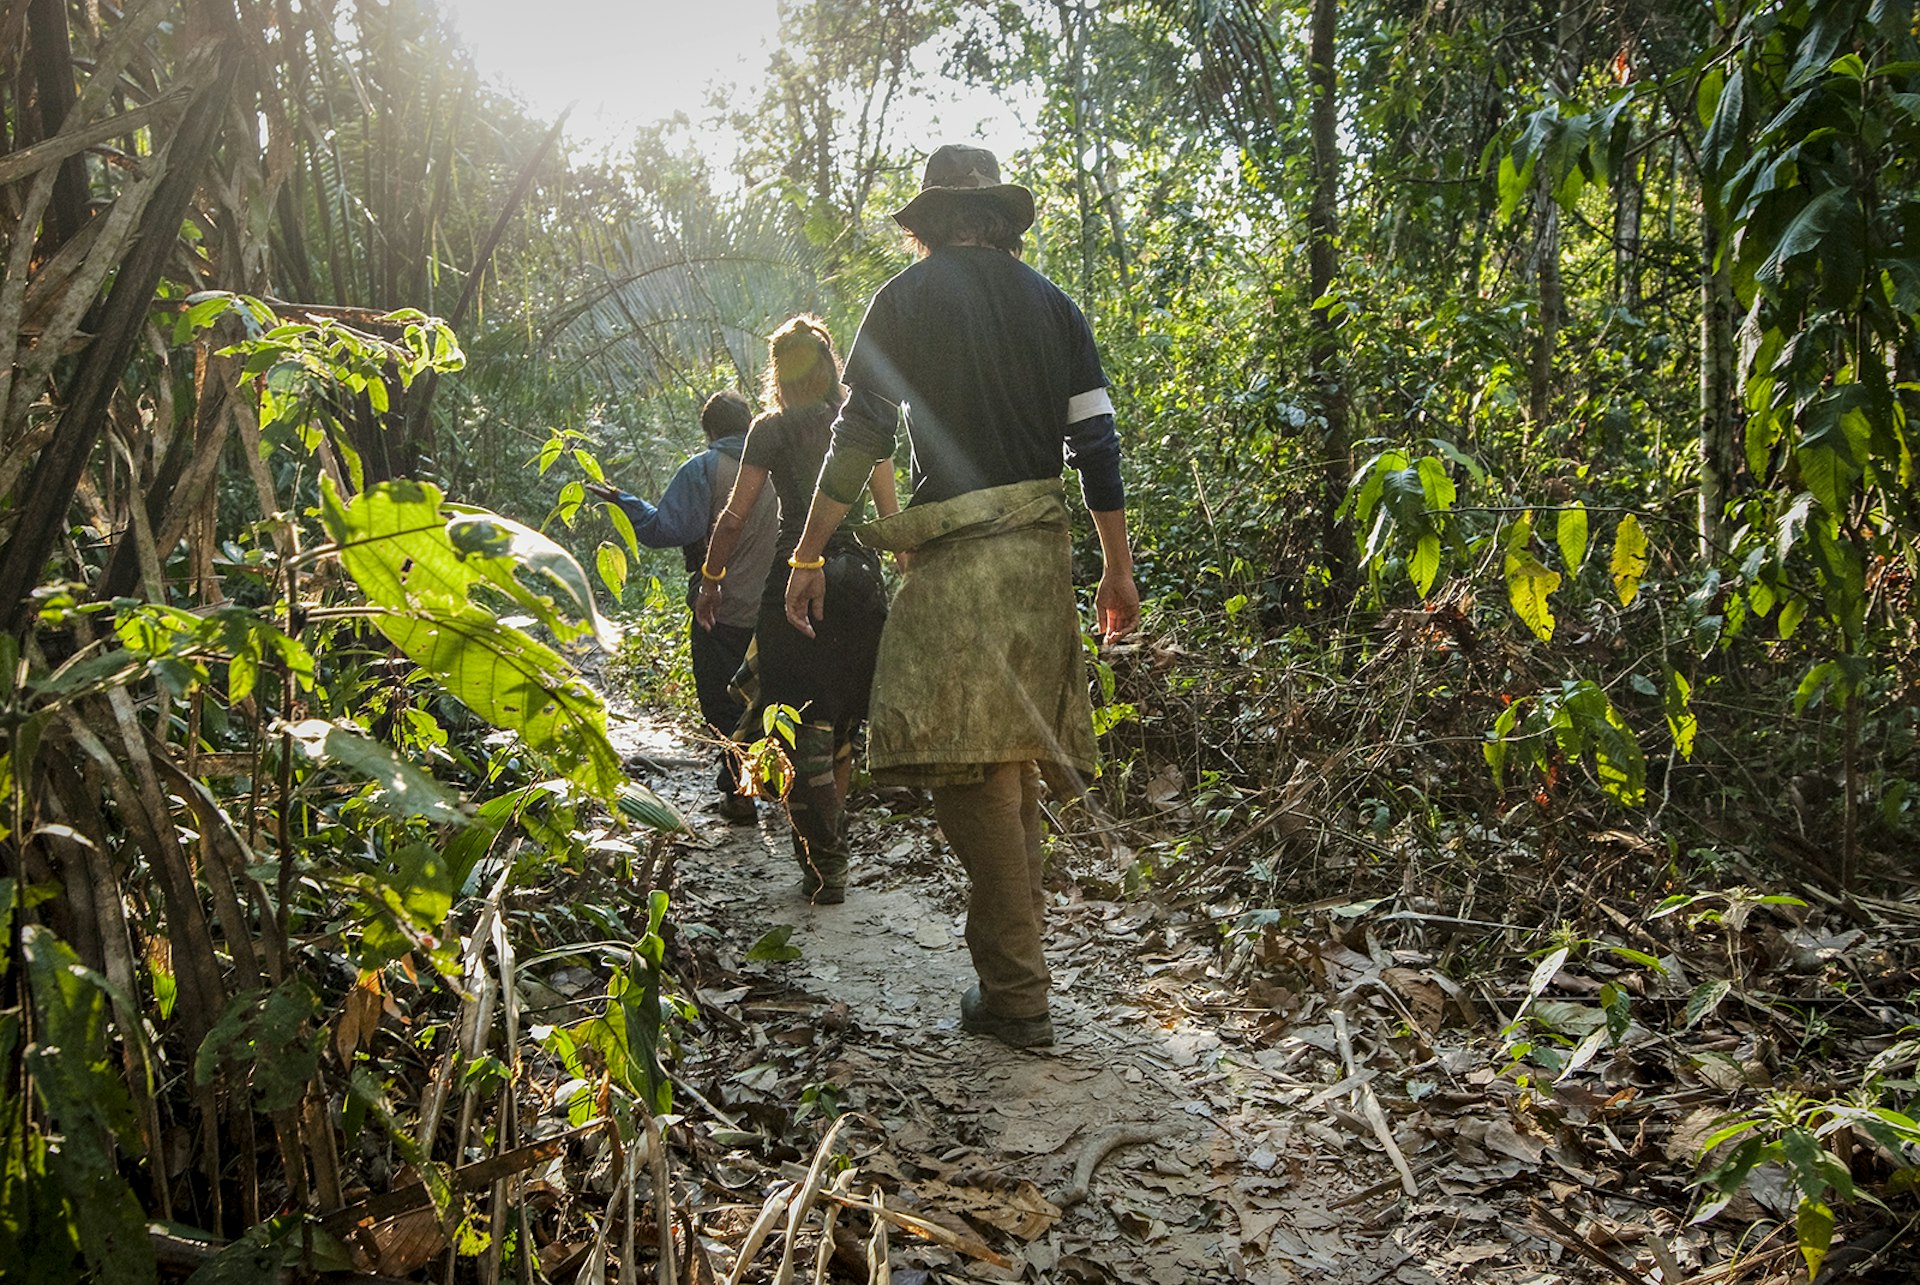 Features - A man and woman walk through the amazon rainforest during the mid morning.